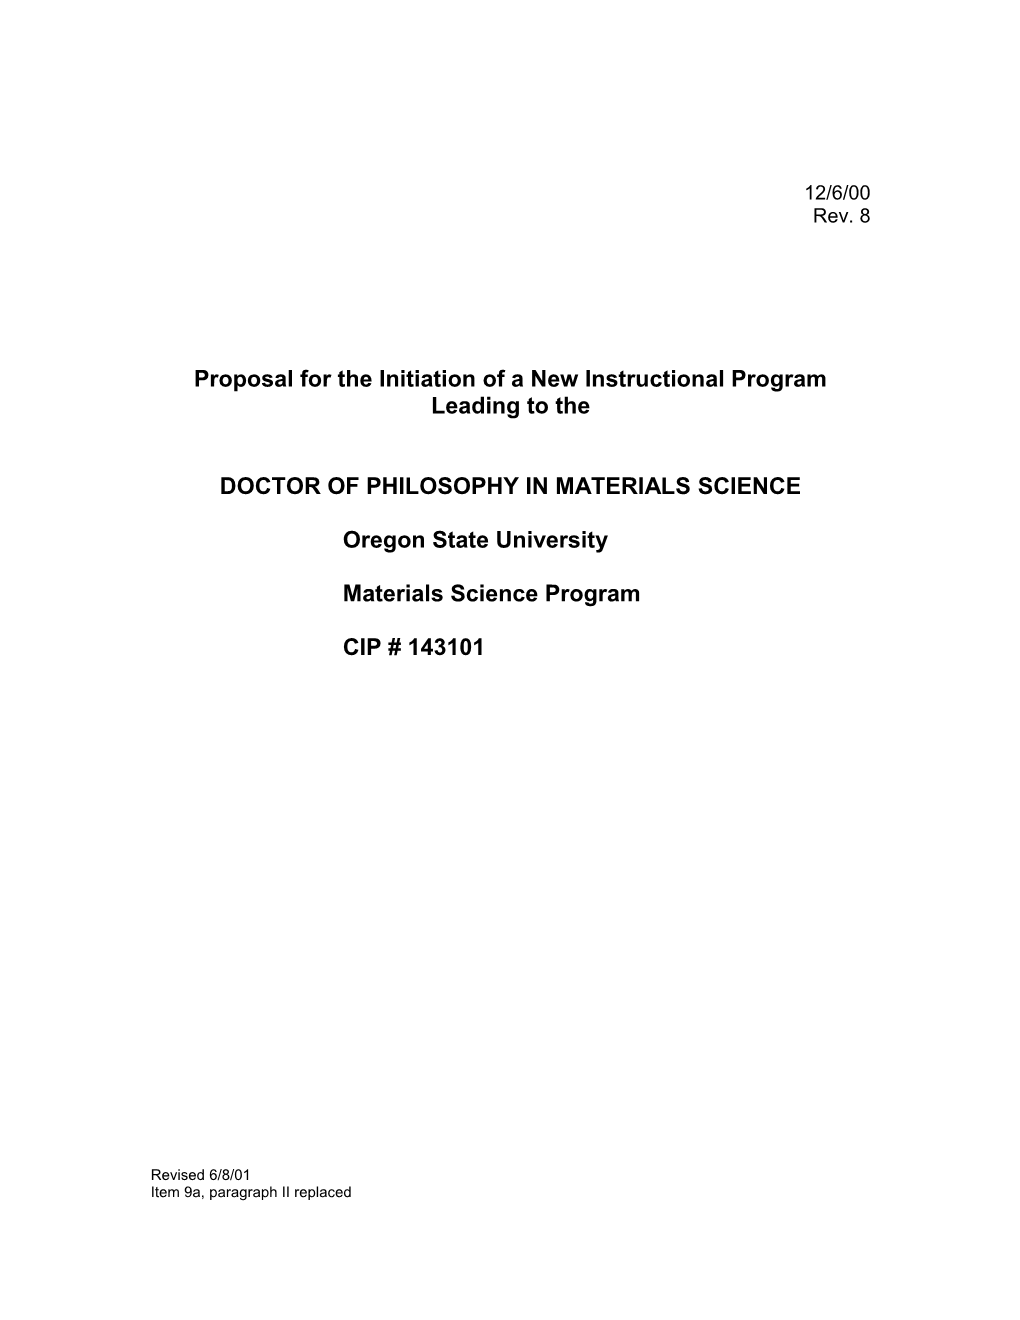 Proposal for the Initiation of a New Instructional Program Leading to The